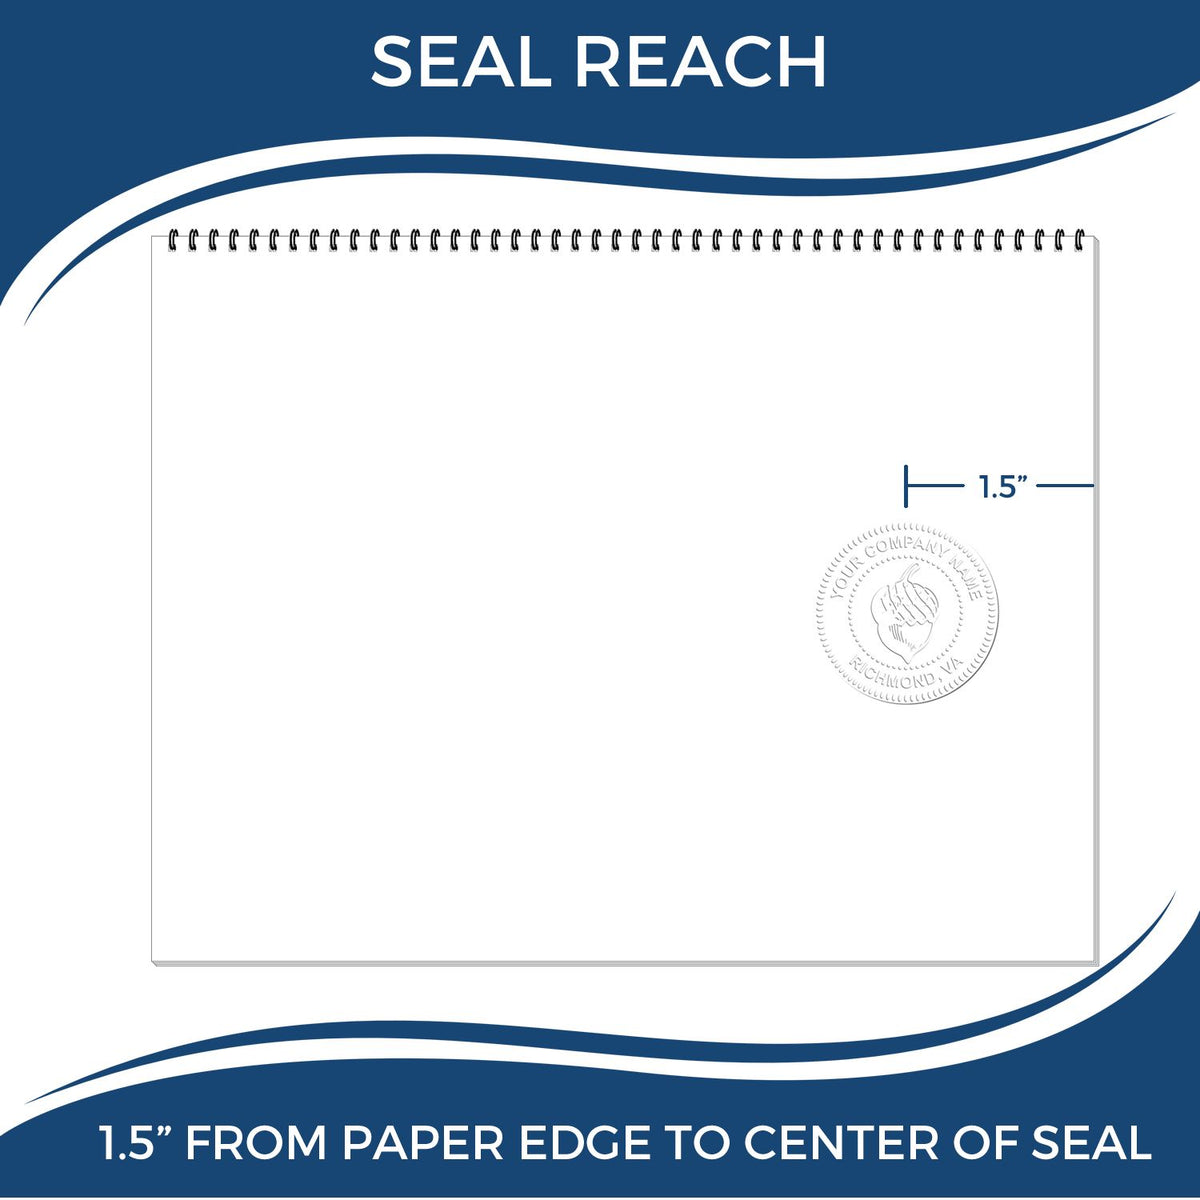 An infographic showing the seal reach which is represented by a ruler and a miniature seal image of the Handheld Pennsylvania Architect Seal Embosser